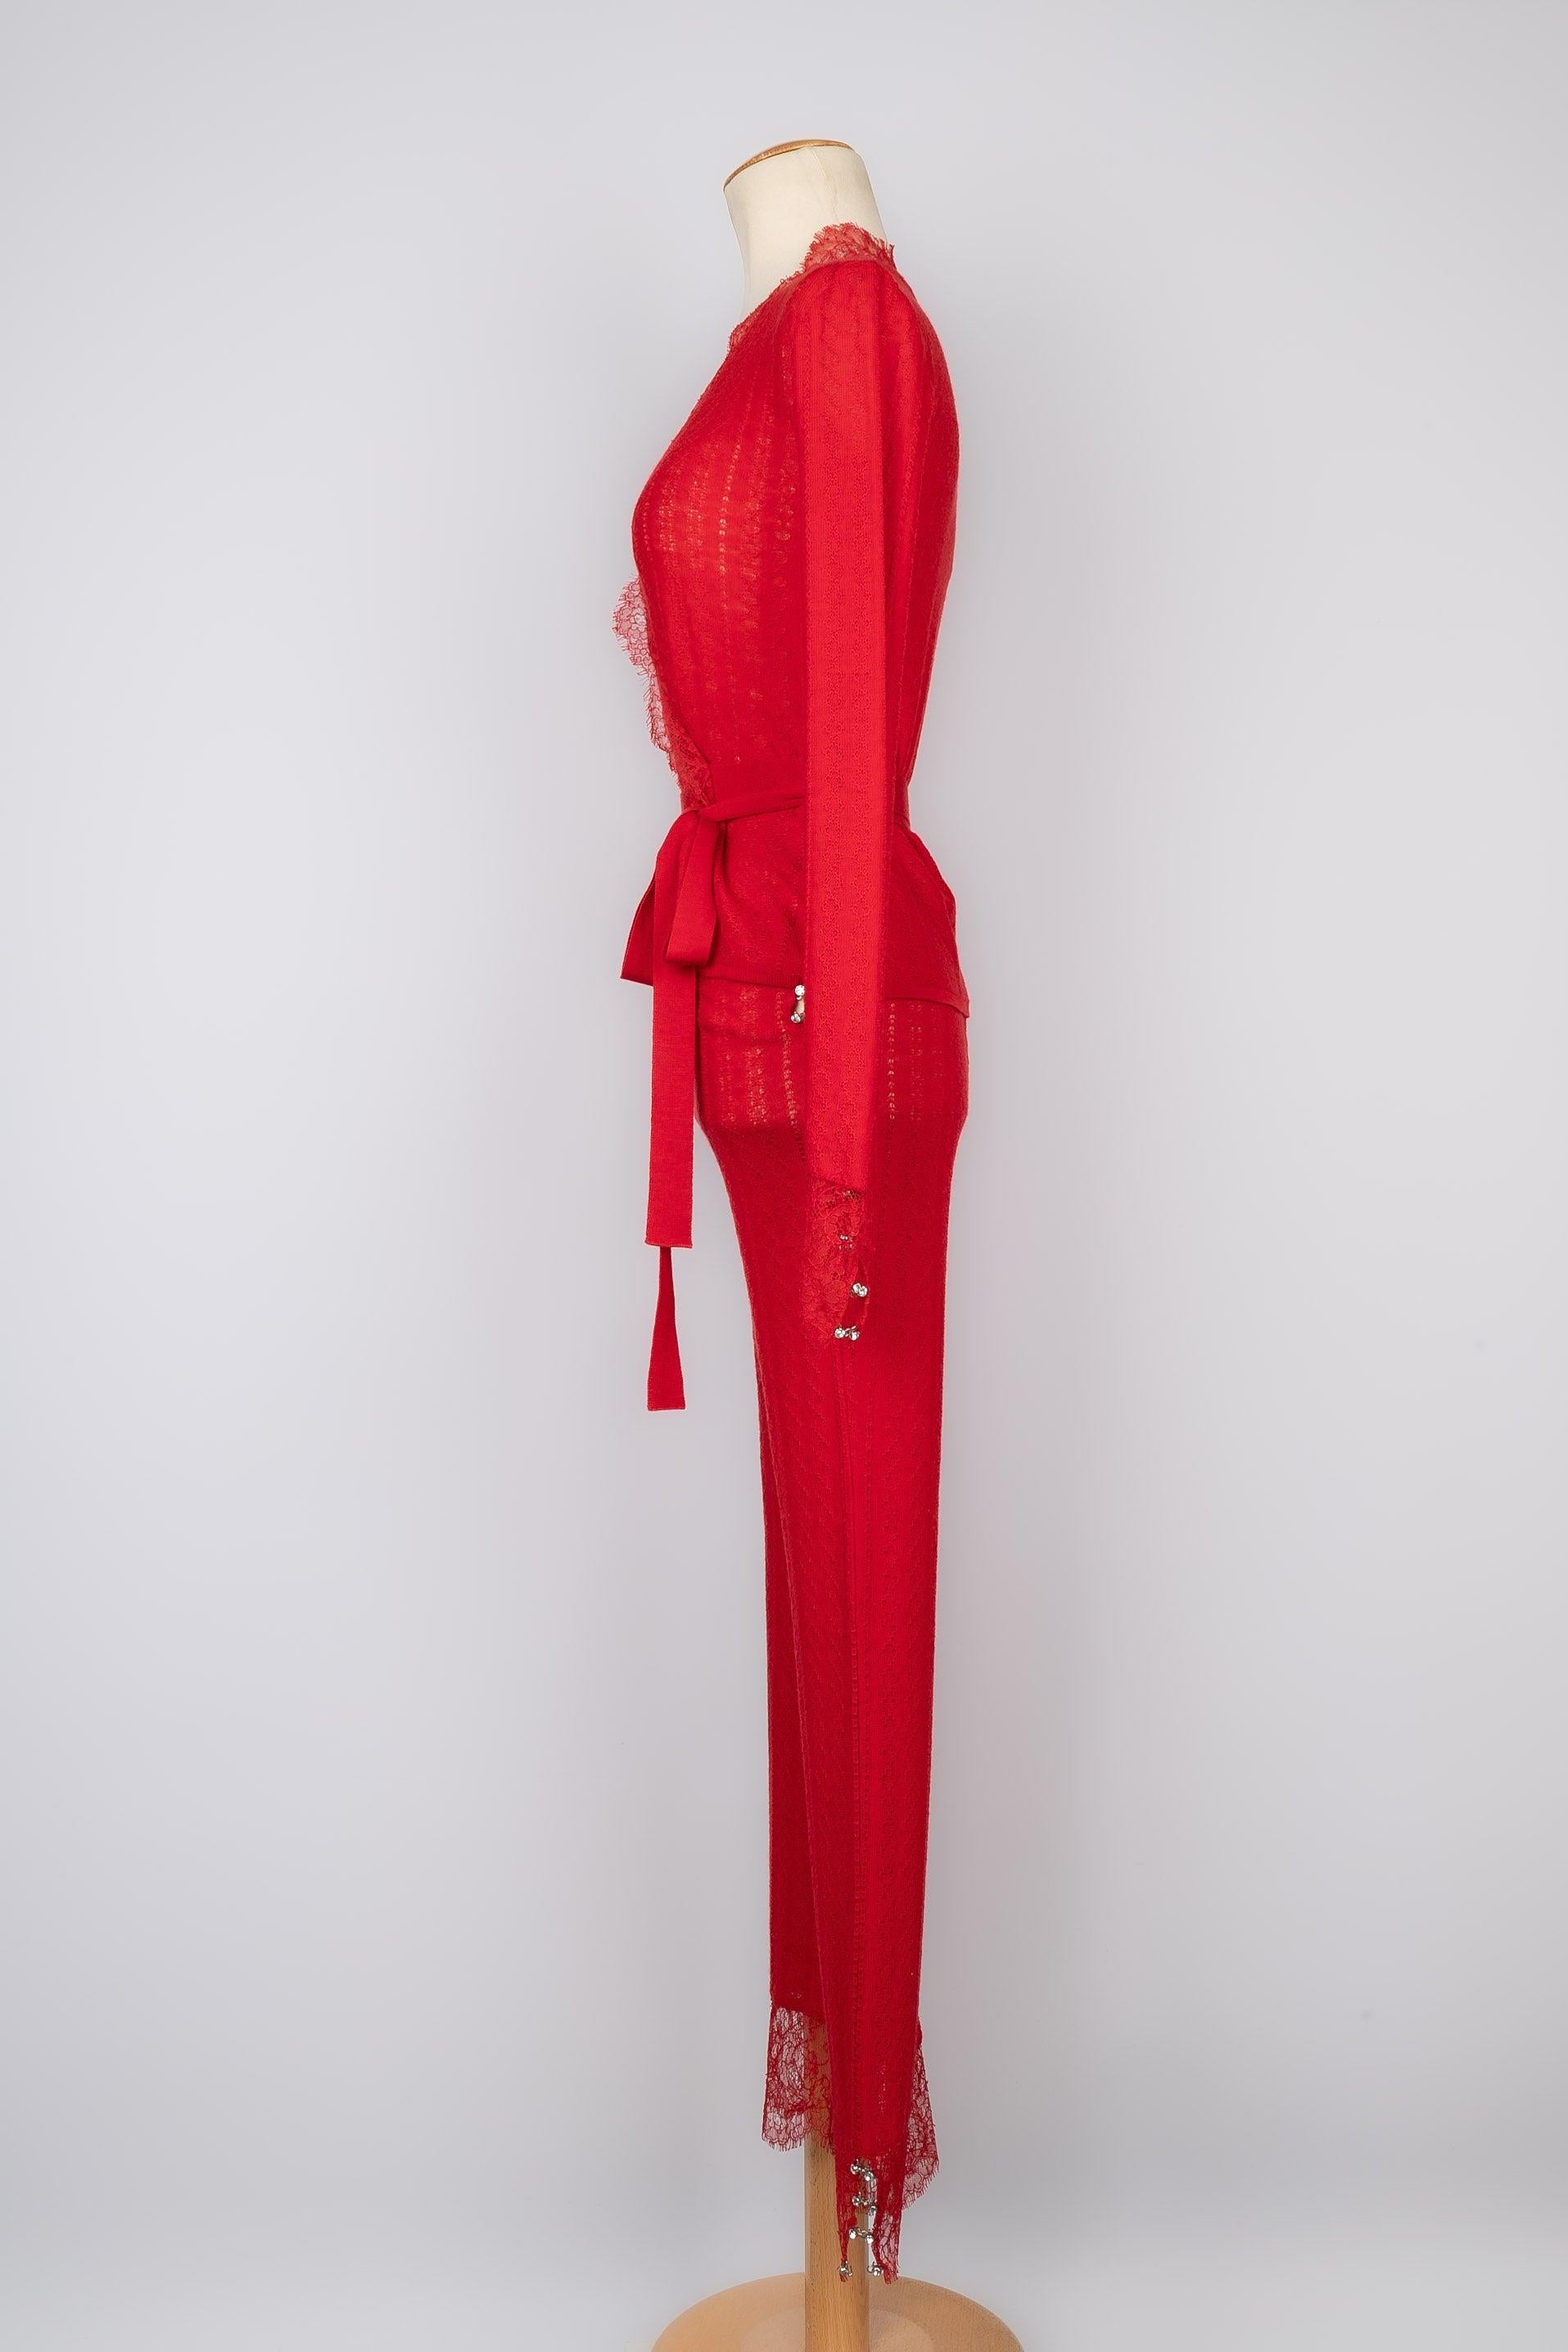 Dior -  (Made in Italy) Red wool and cashmere set composed o a wrap-over top and pants. Size 38FR.

Additional information:
Condition: Very good condition
Dimensions: Wrap-over top: Shoulder width: 39 cm - Sleeve length: 64 cm - Length: 56 cm 
Pants